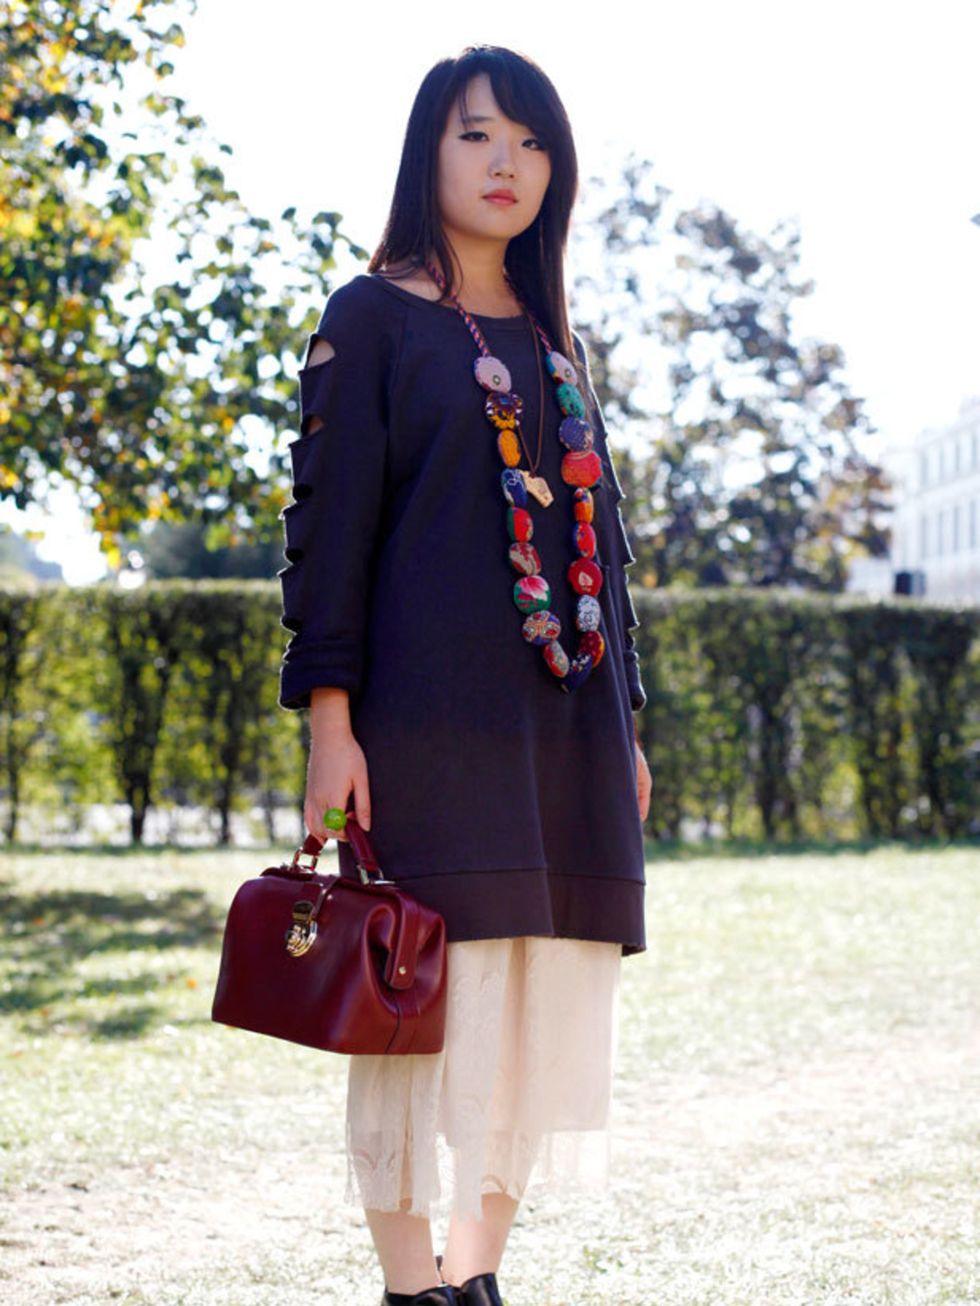 <p>Photo by Silvia Olsen @ Anthea SimmsCornelia Duan, 21, Fashion Designer. Dress from Korea, bag and shirt from Tokyo, Office boots, necklace from Brick Lane.</p>